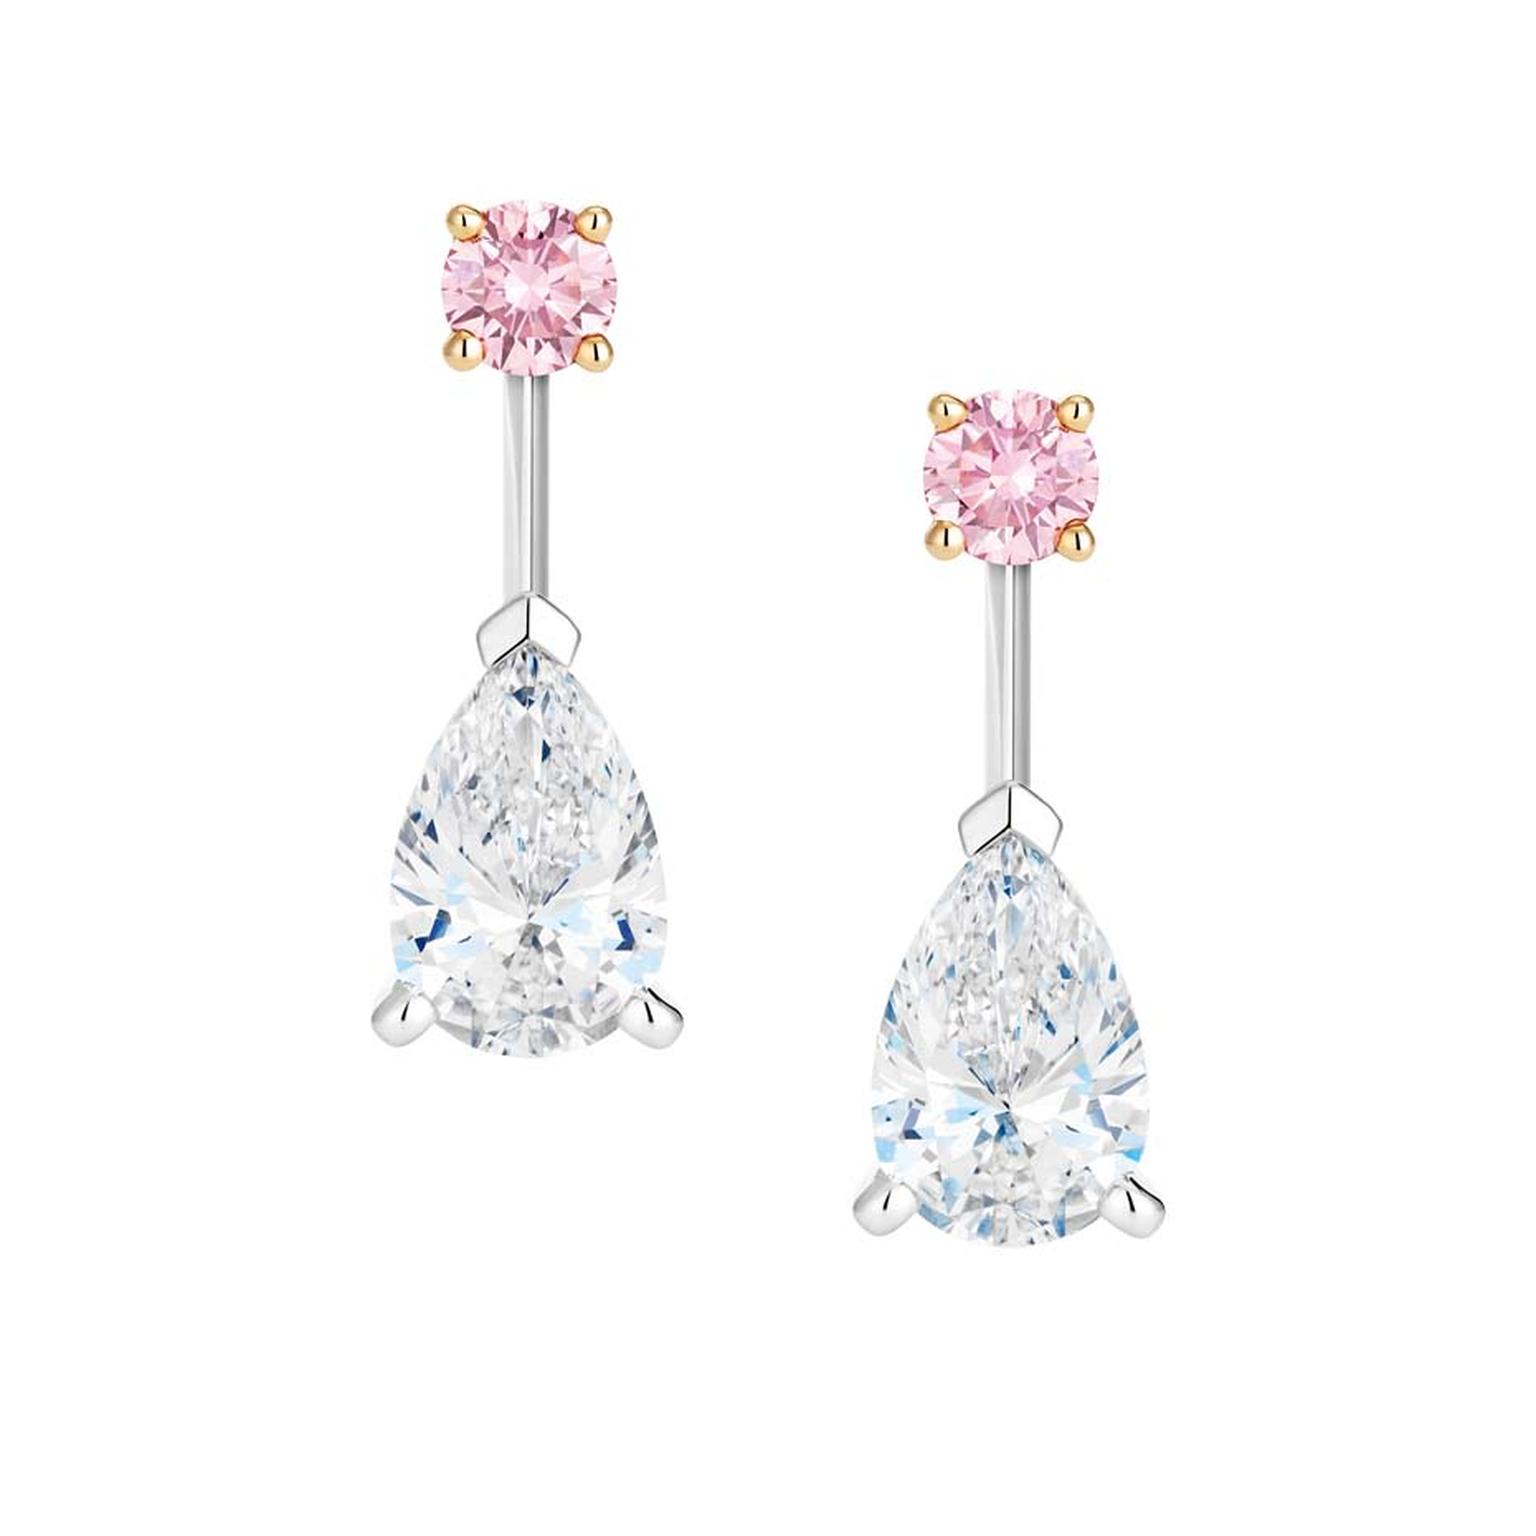 Set with pink round brilliant and pear-cut white diamonds, these De Beers earrings from the Drops of Light collection can easily be transformed from day to night thanks to the detachable diamond drop.